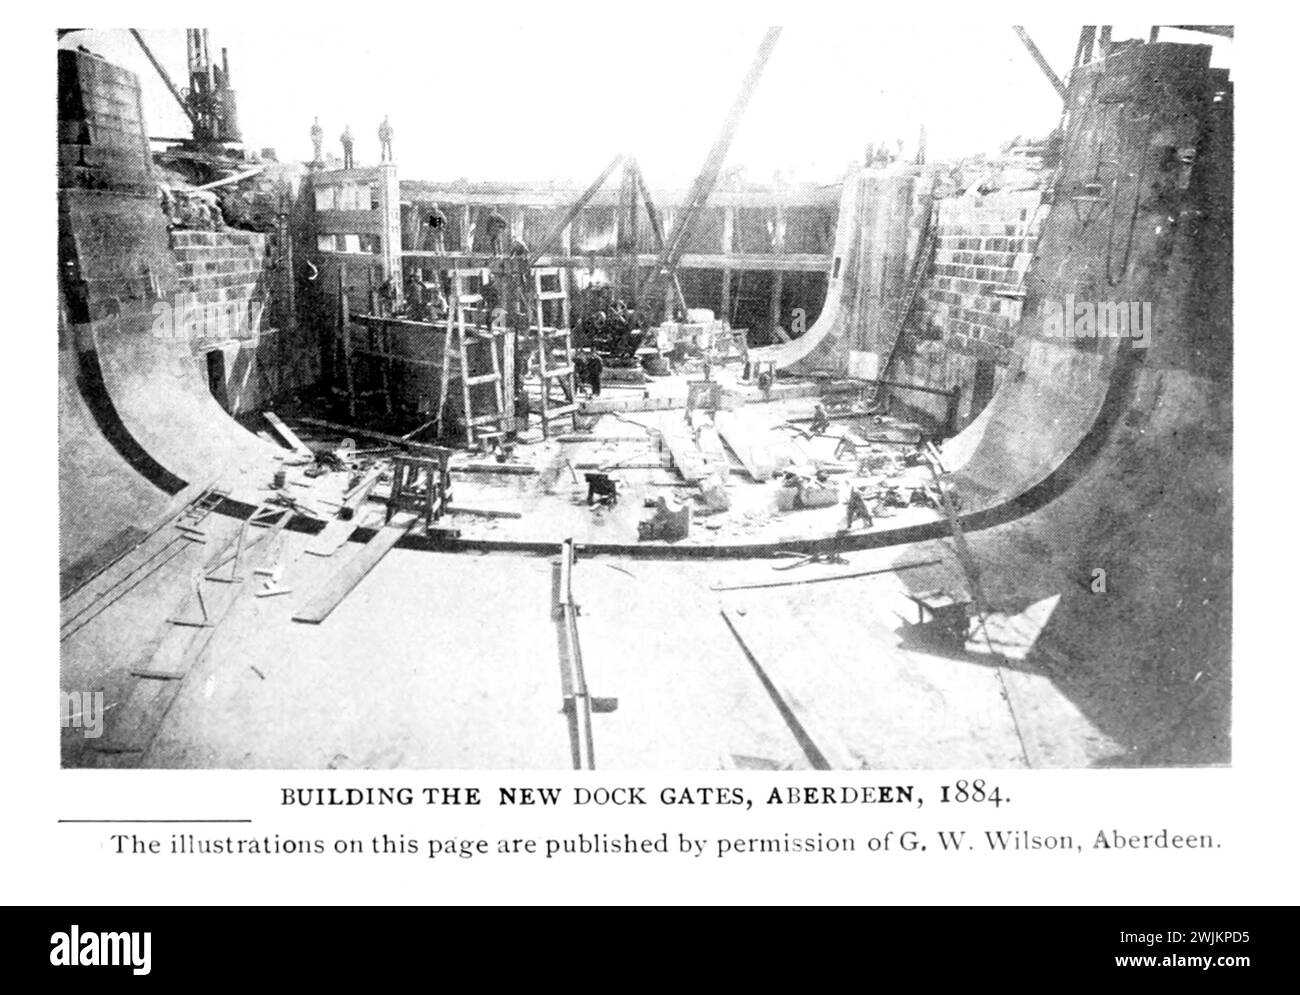 BUILDING THE NEW DOCK GATES, ABERDEEN, 1884. from the Article MODERN WHARF IMPROVEMENTS AND HARBOR FACILITIES. Part III By Foster Crowell. from The Engineering Magazine Devoted to Industrial Progress Volume XIV October 1897 - March 1898 The Engineering Magazine Co Stock Photo